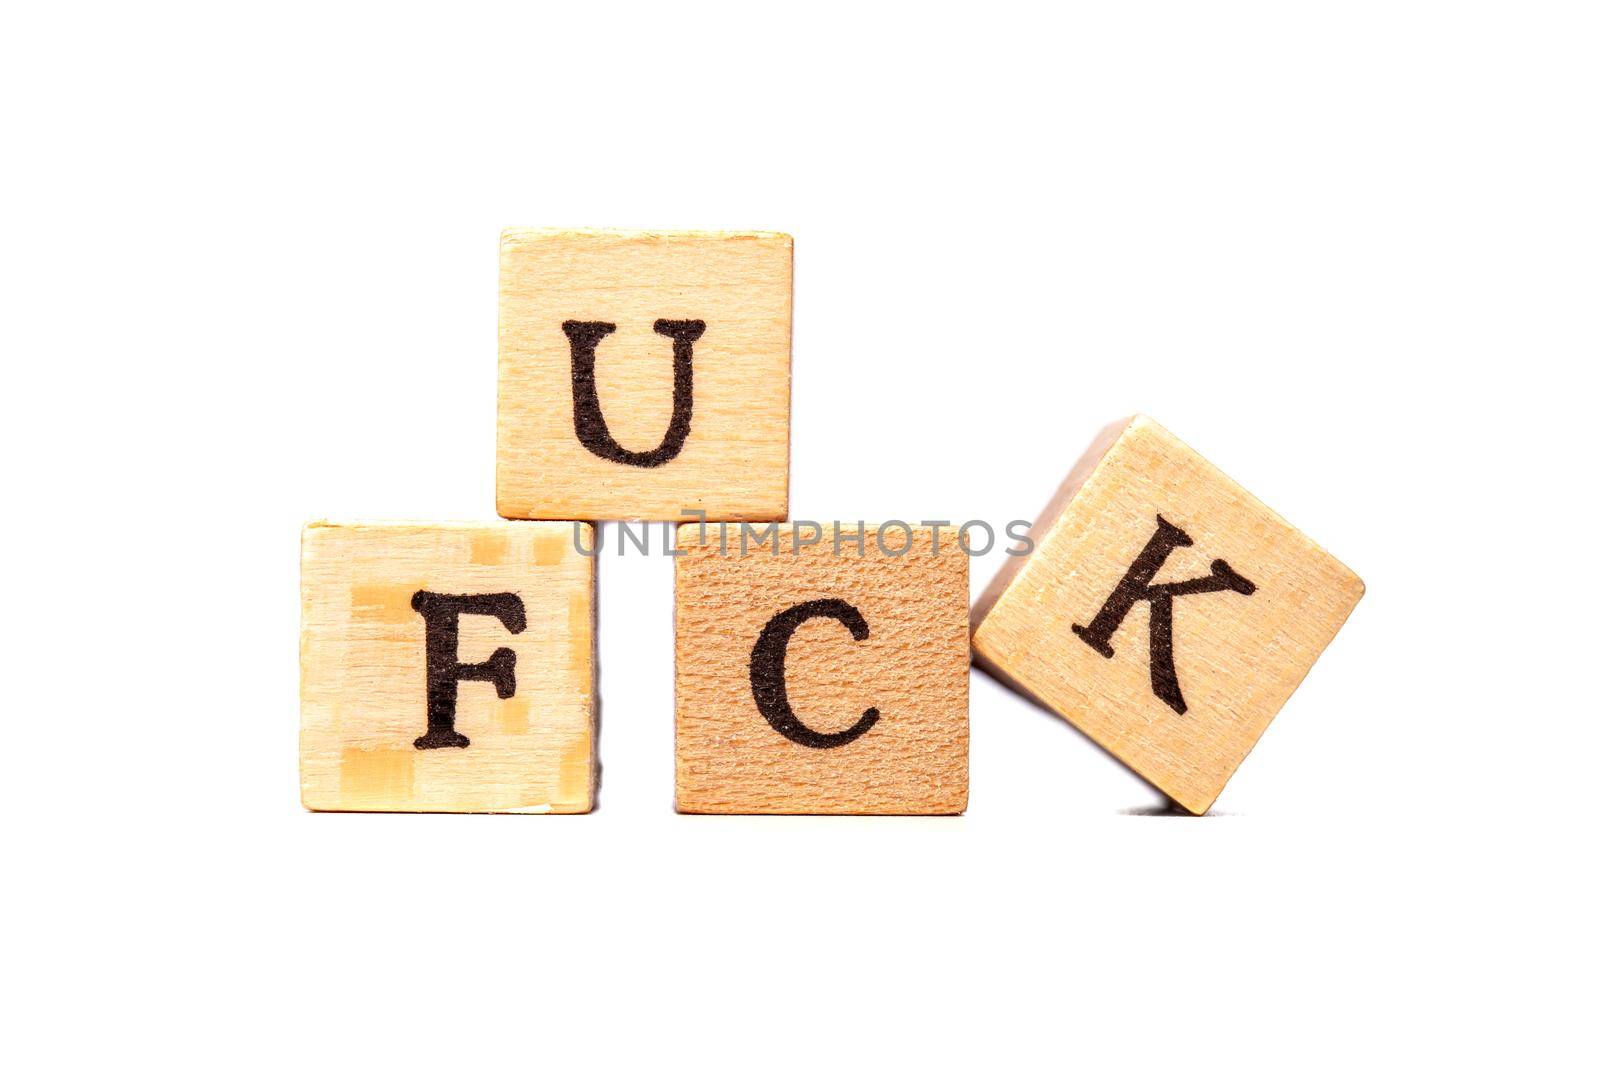 the f word on wooden cubes by kokimk